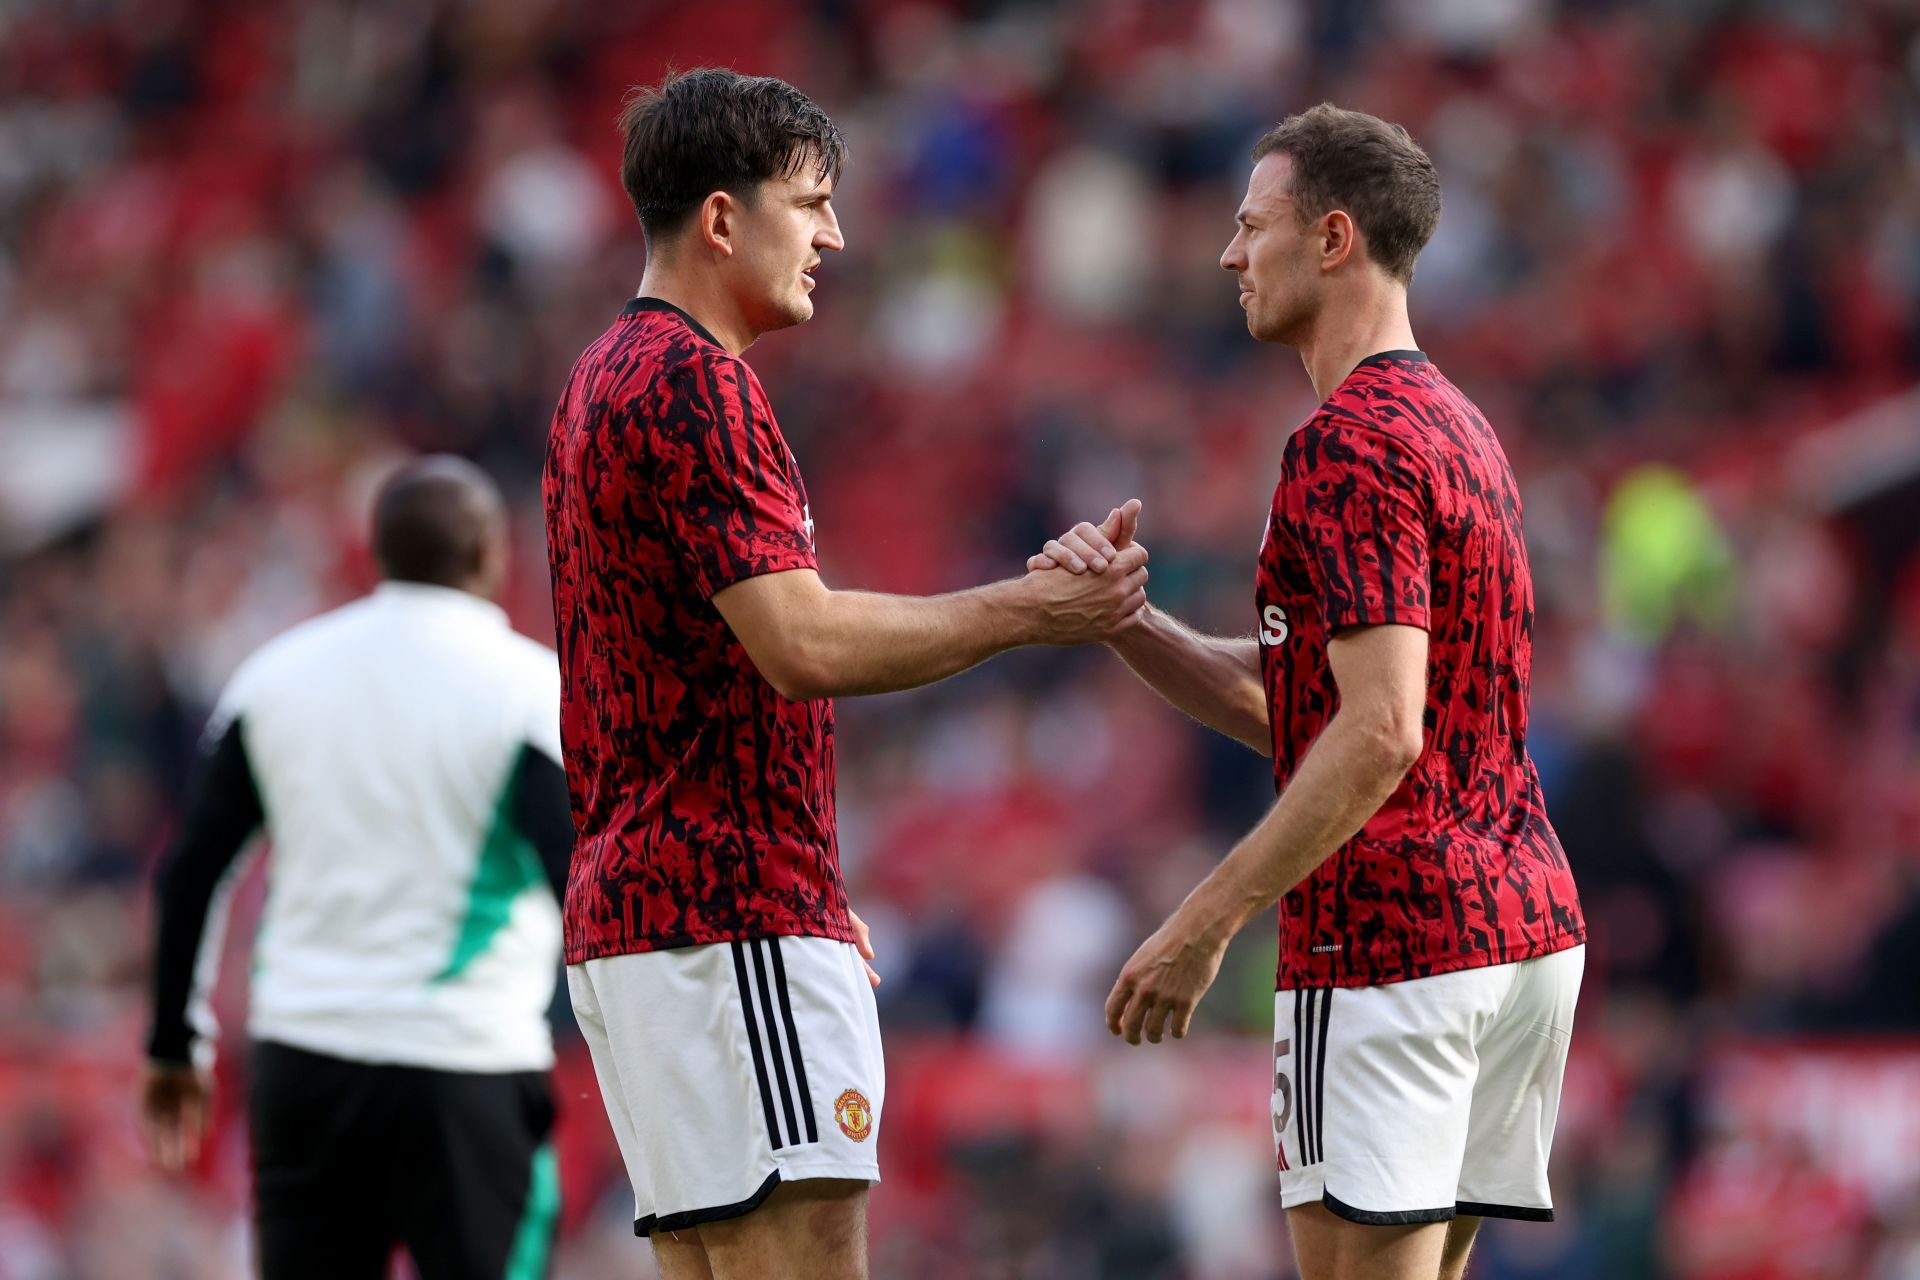 Harry Maguire and Jonny Evans previously played together at Leicester City.